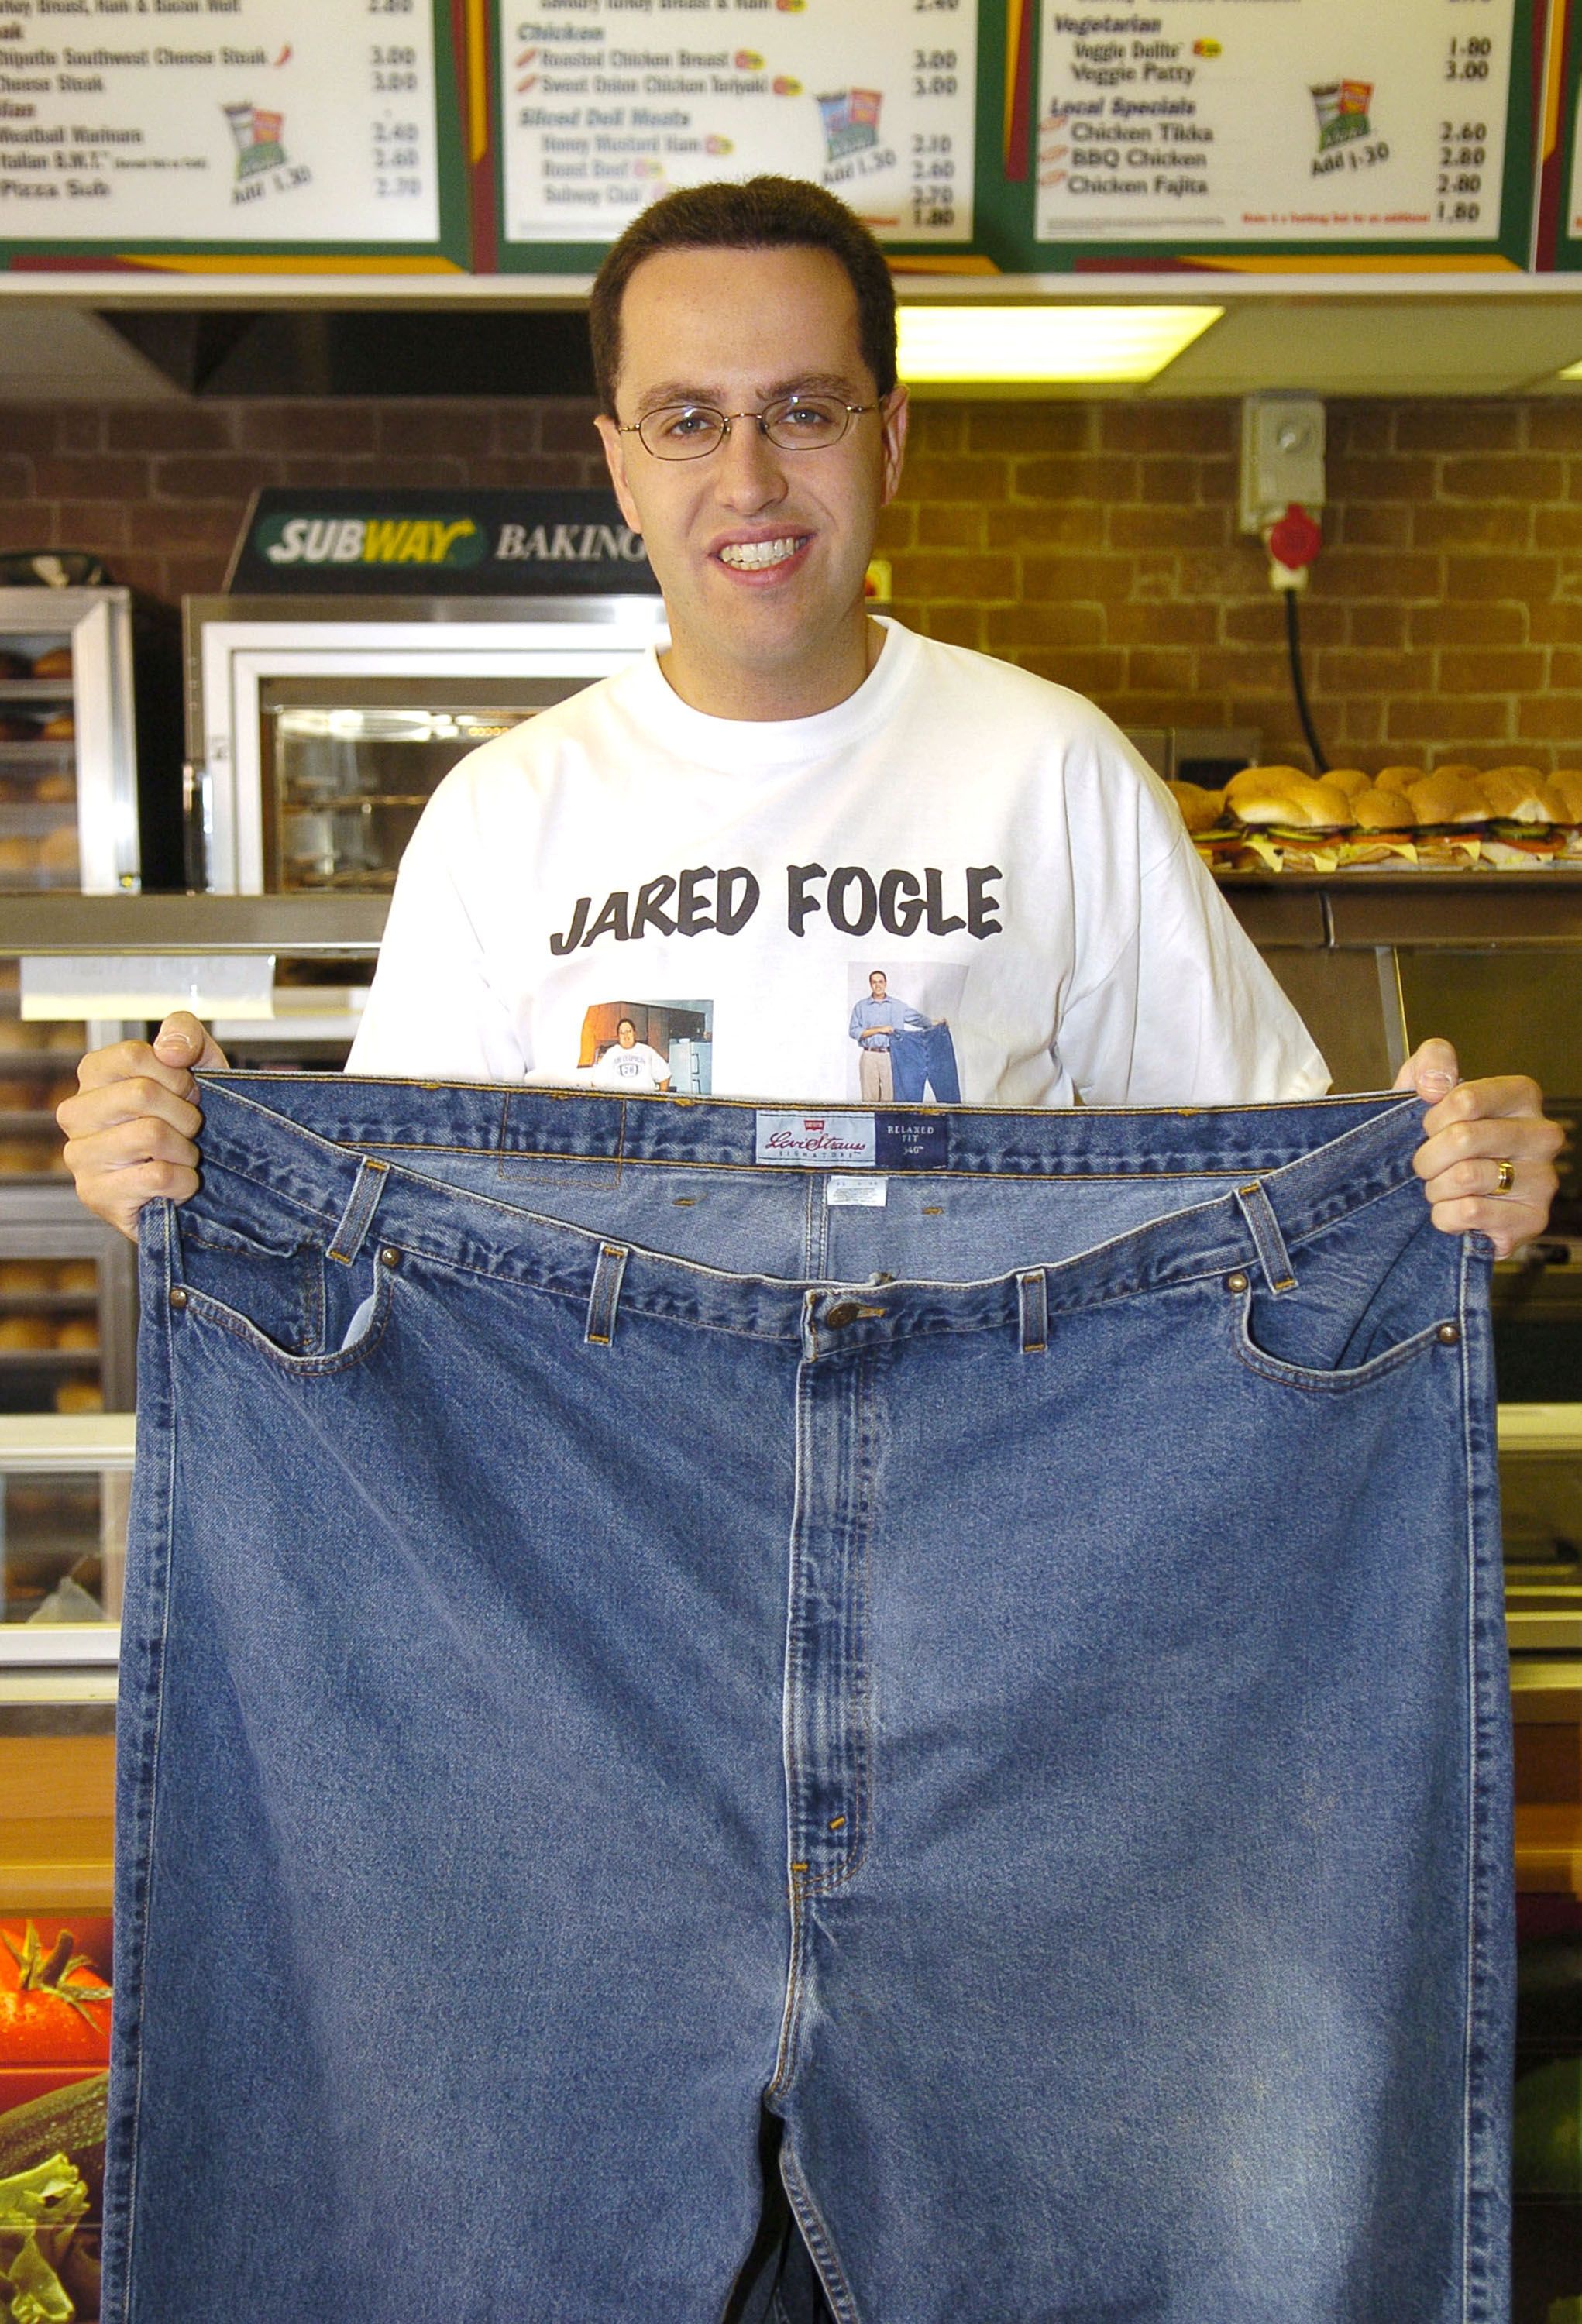 Ex-Subway Spokesman Jared Fogle Gains Back Weight While in Prison